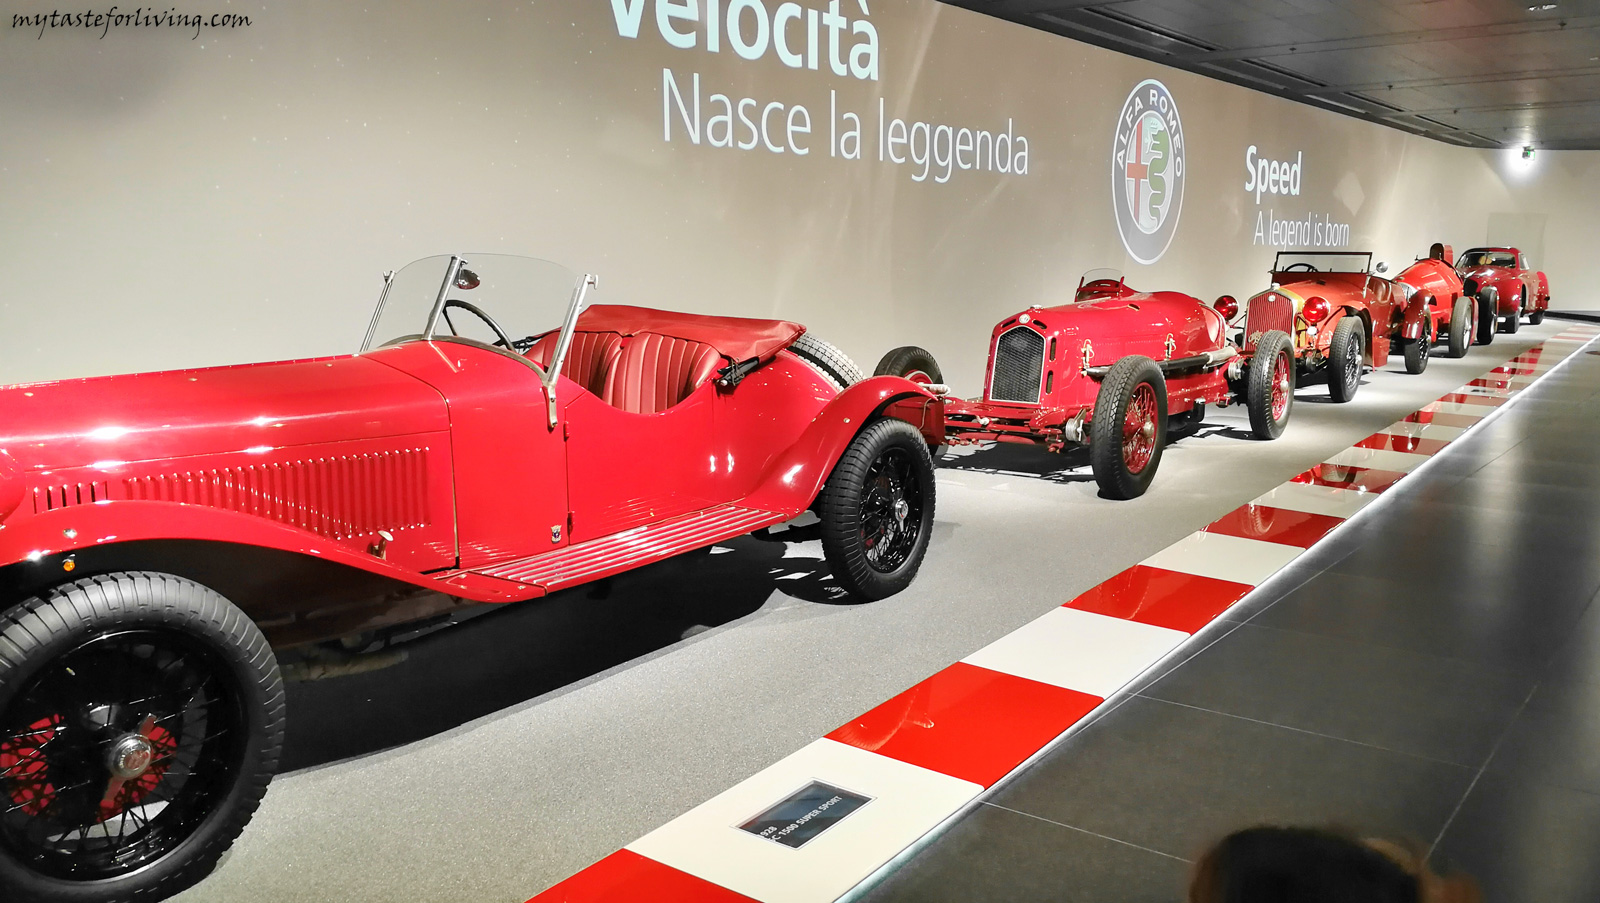 "The Alfa Romeo History Museum" (Museo Storico Alfa Romeo) of the italian automotive company was opened on december 18, 1976. The museum was built in the city of Arese, 12 km from Milan.